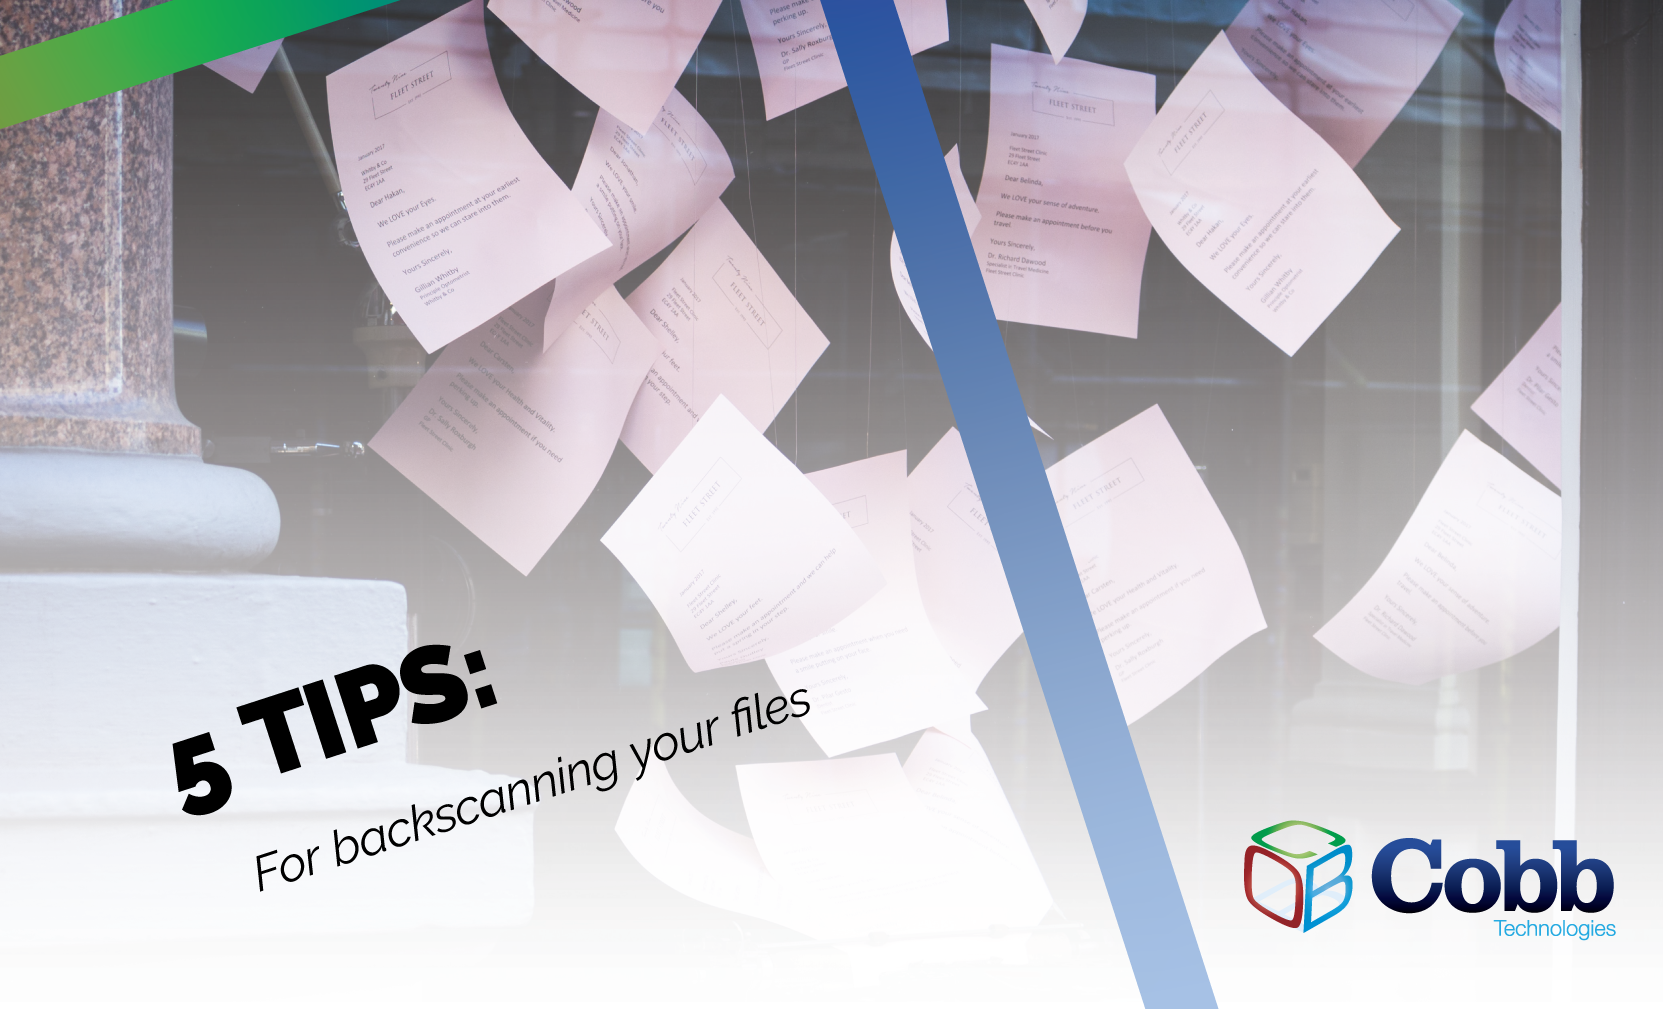 5 Tips for Back-Scanning Your Files